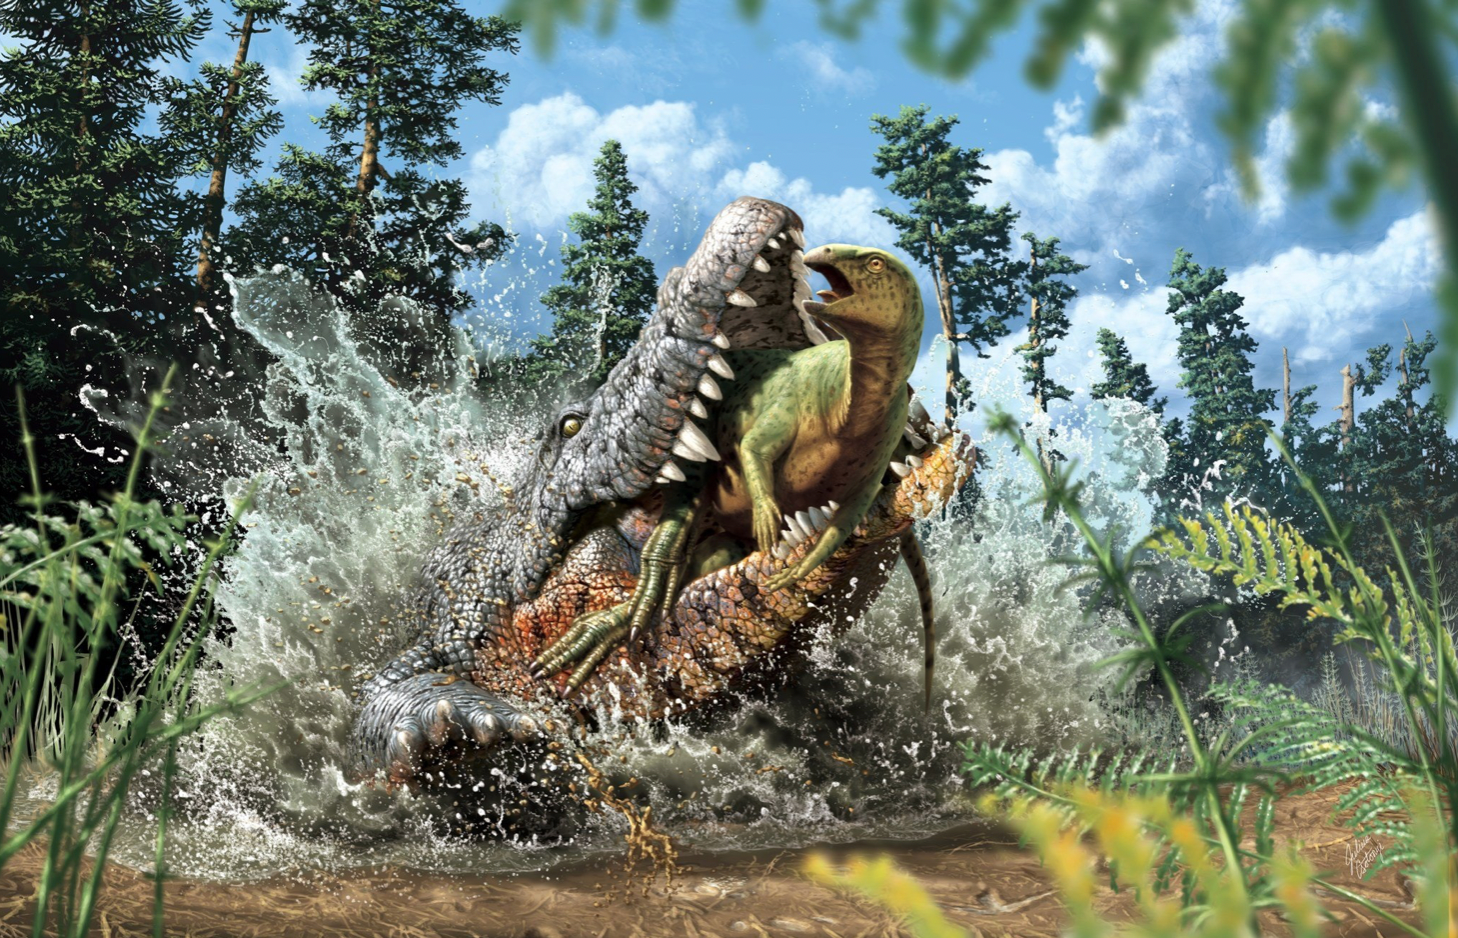 Reconstruction shows last moments of juvenile ornithopod dinosaur in the jaws of a Cretaceous crocodilian